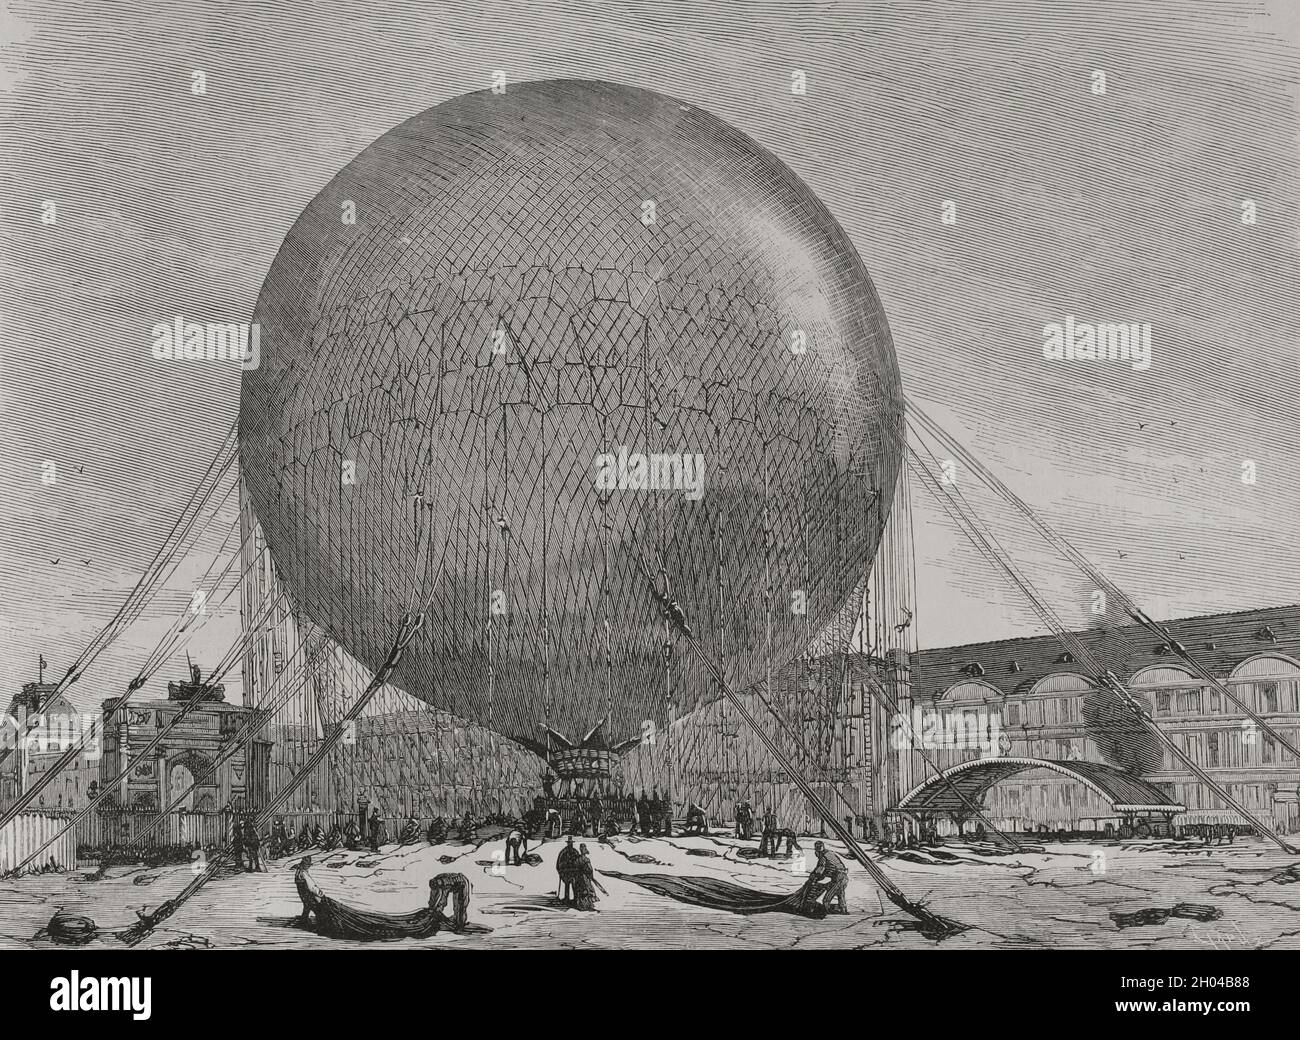 France, Paris. Preparations for the first ascent of the Captive Balloon in the Tuileries Garden, verified on July 18, 1878, during the Paris Universal Exhibition. Engraving by Capuz. La Ilustración Española y Americana, 1878. Stock Photo